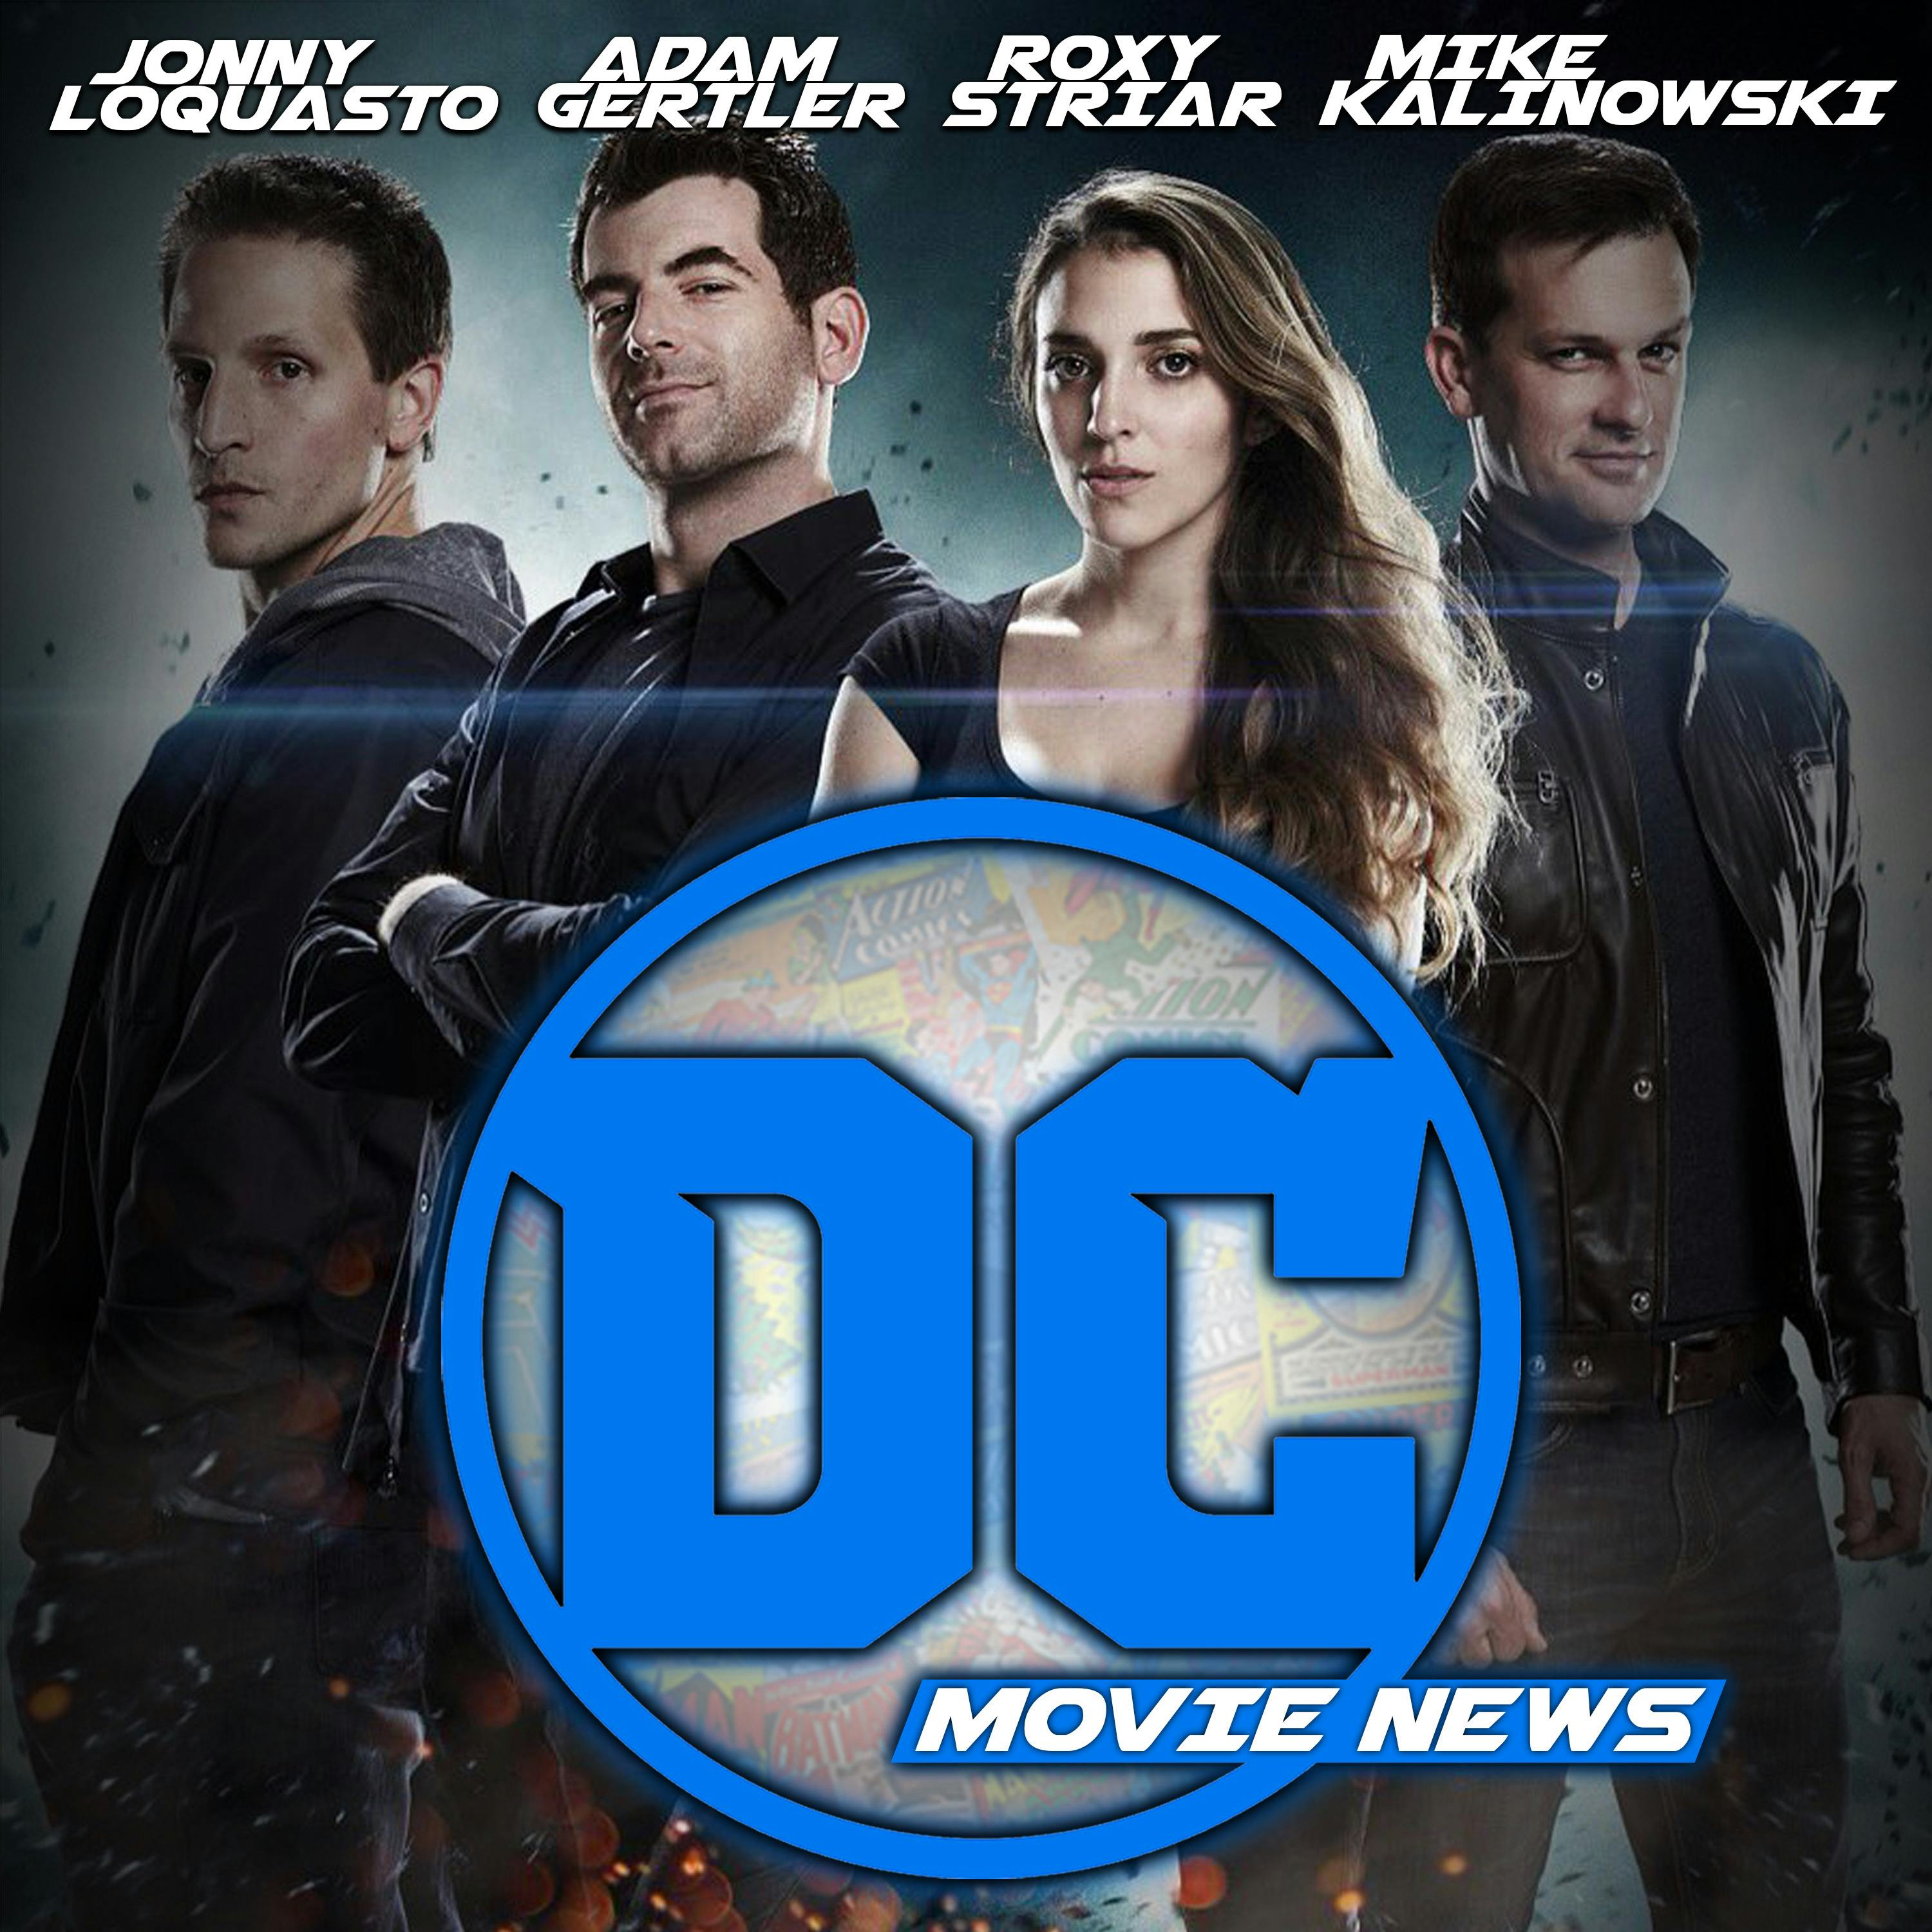 Will DC say goodbye to Affleck & Cavill? + The Flash Production Delayed Until 2019